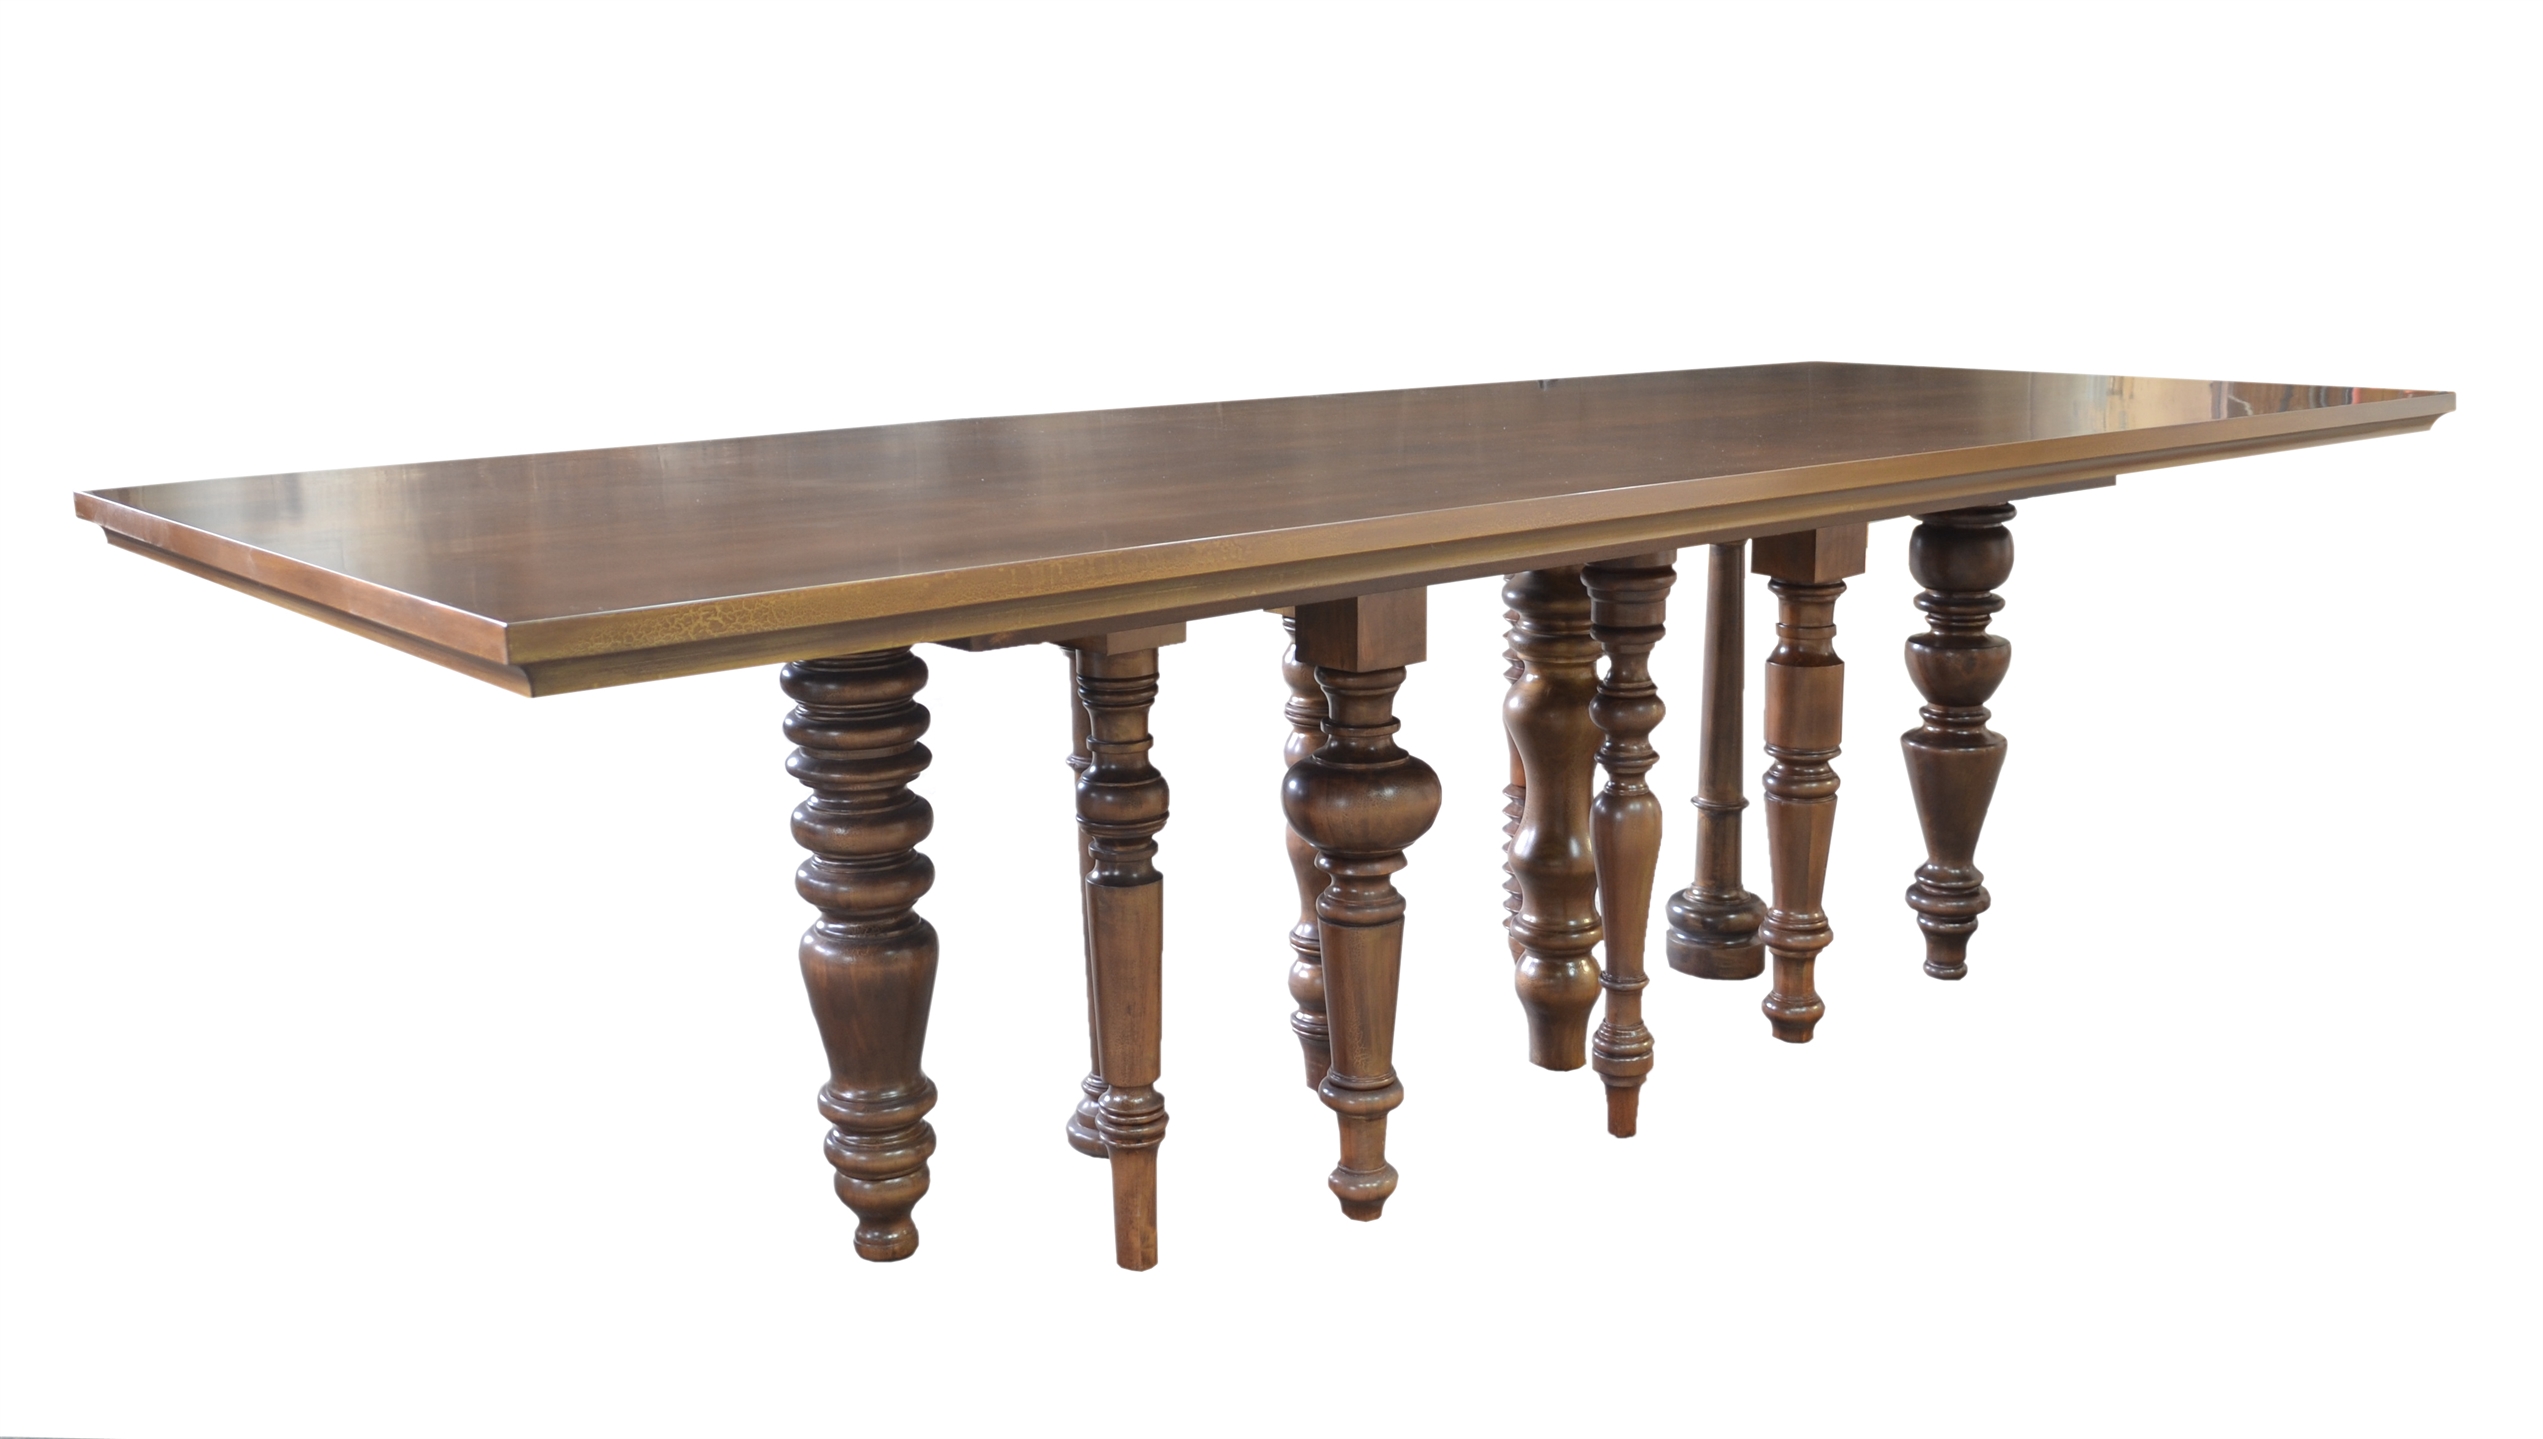 SPECIAL BRONZE FINISH MILLENNIAL DINING TABLE